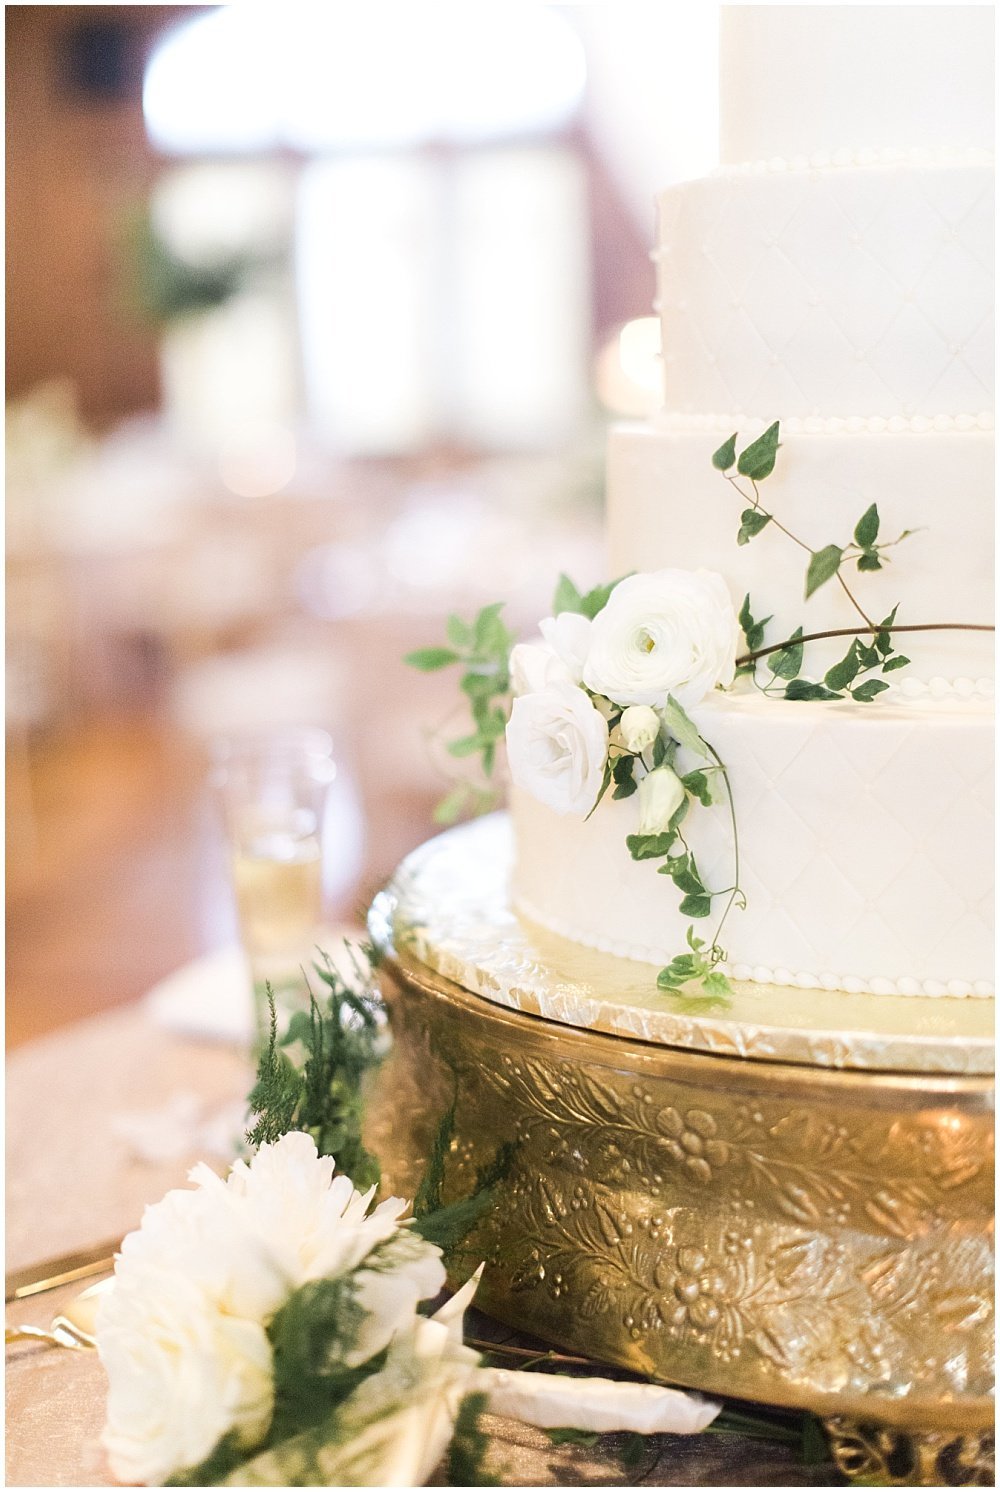 Spring-Scottish-Rite-Cathedral-Neutral-Gold-Ivory-Greenery-Floral-Indianapolis-Wedding-Ivan-Louise-Images-Jessica-Dum-Wedding-Coordination_photo_0019